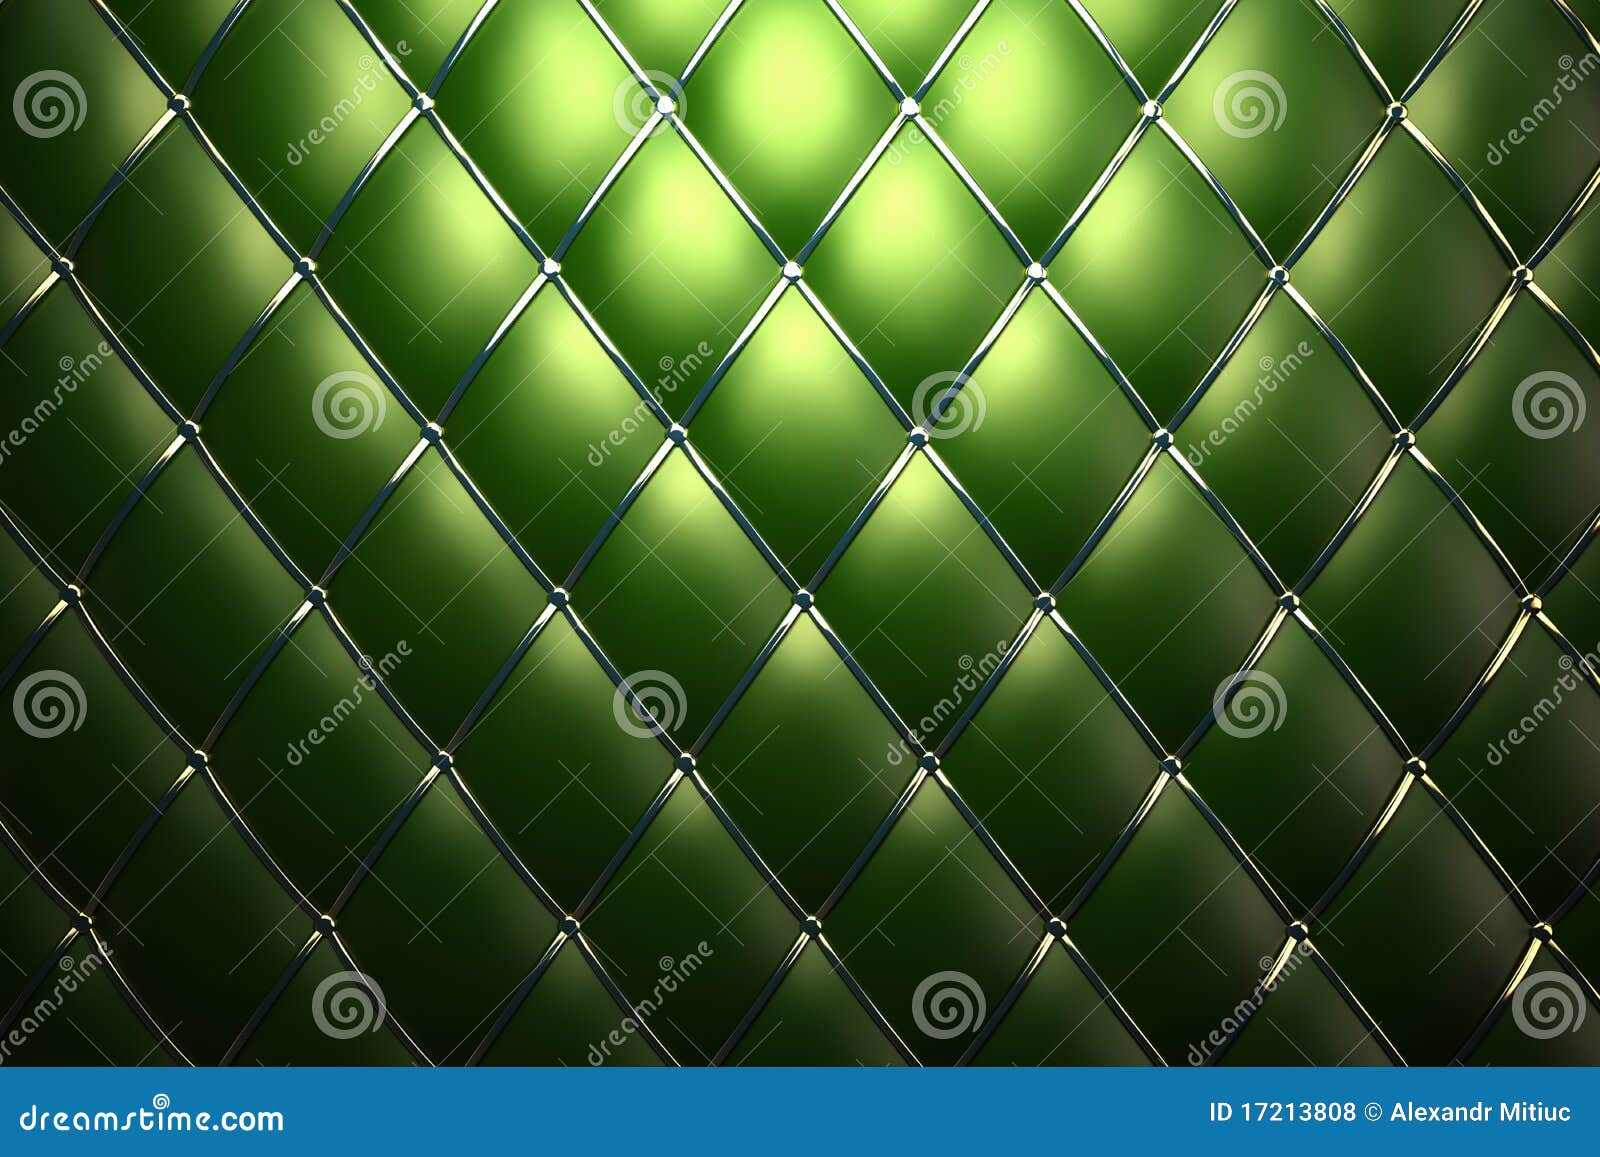 green genuine leather pattern background